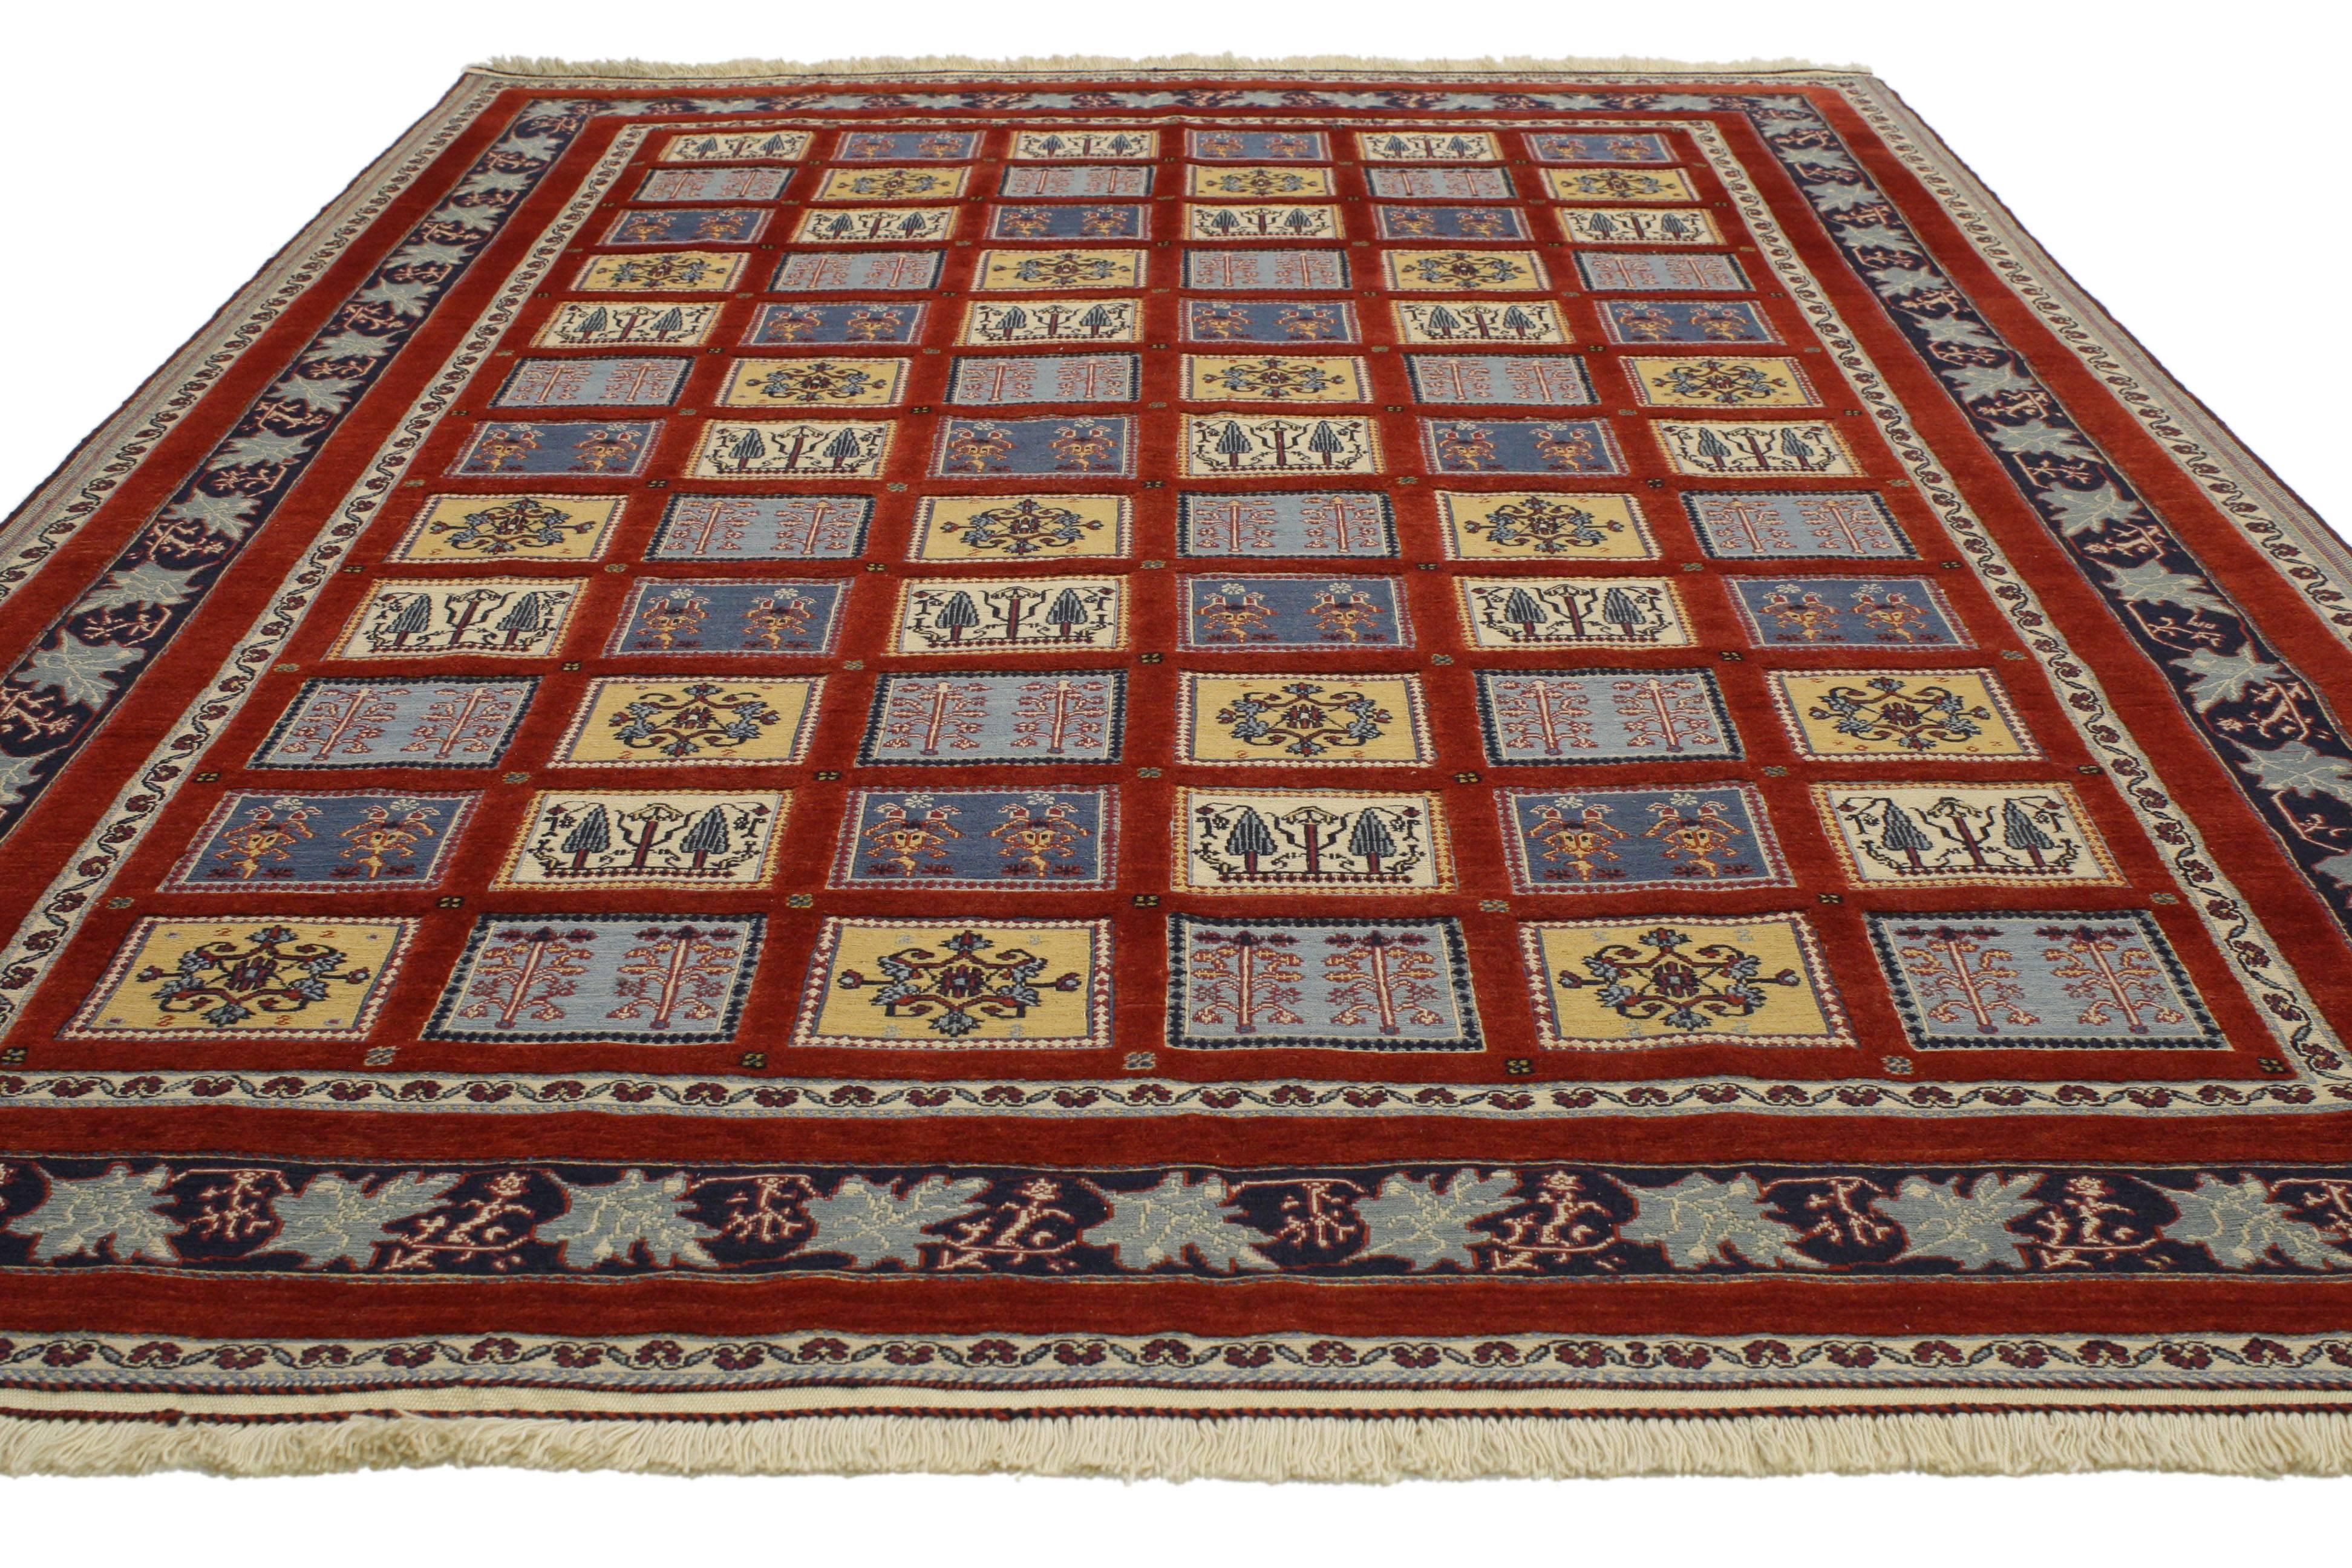 Primary colors integrated with a rich patina, this vintage Gabbeh Indian rug features the Four Seasons design with a traditional modern style. Classically composed and boasting a truly magnificent Four Seasons panel compartment garden design, this